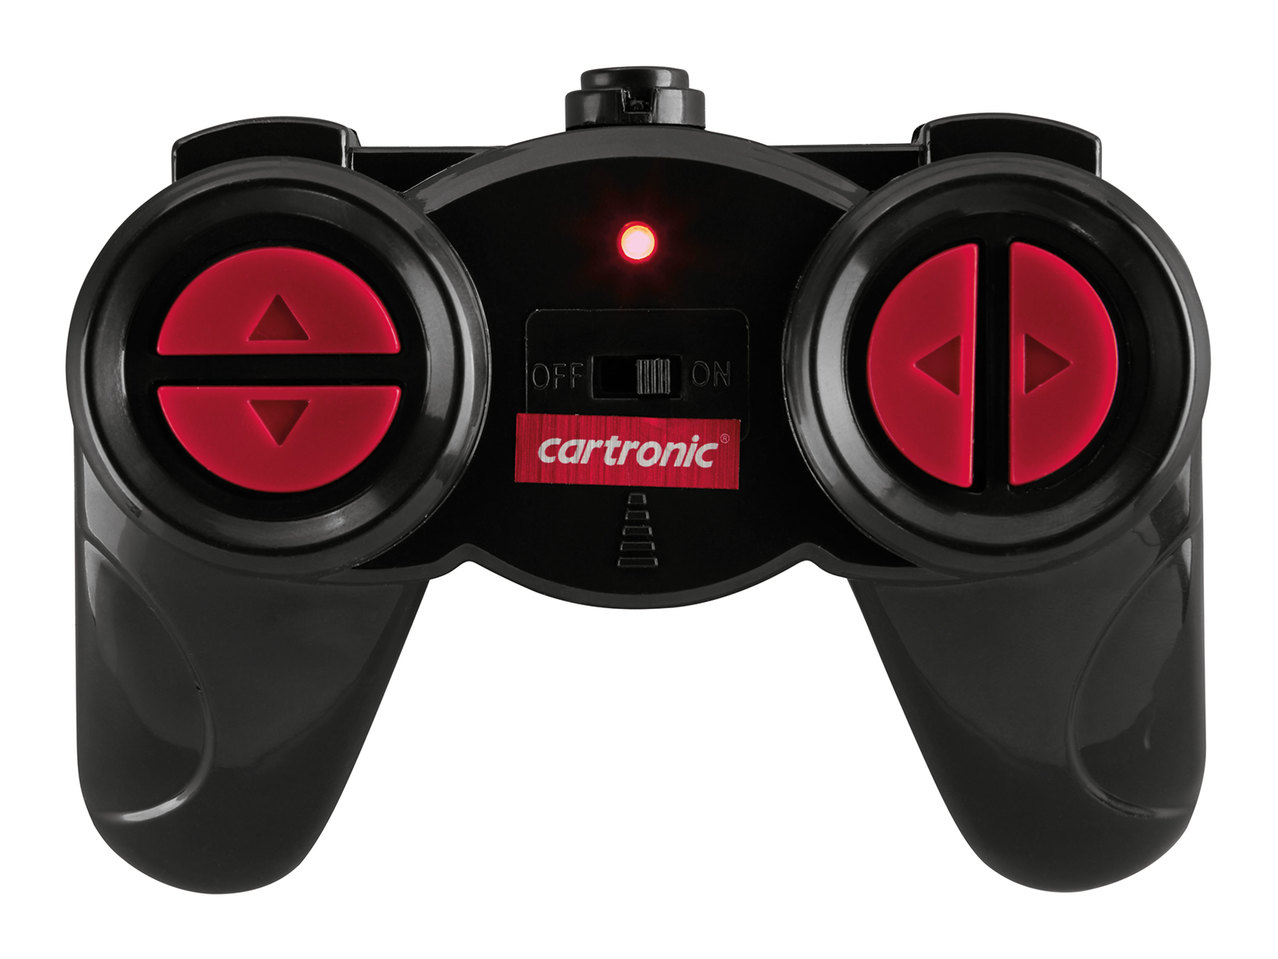 Cartronic Remote-Controlled Sports Car1